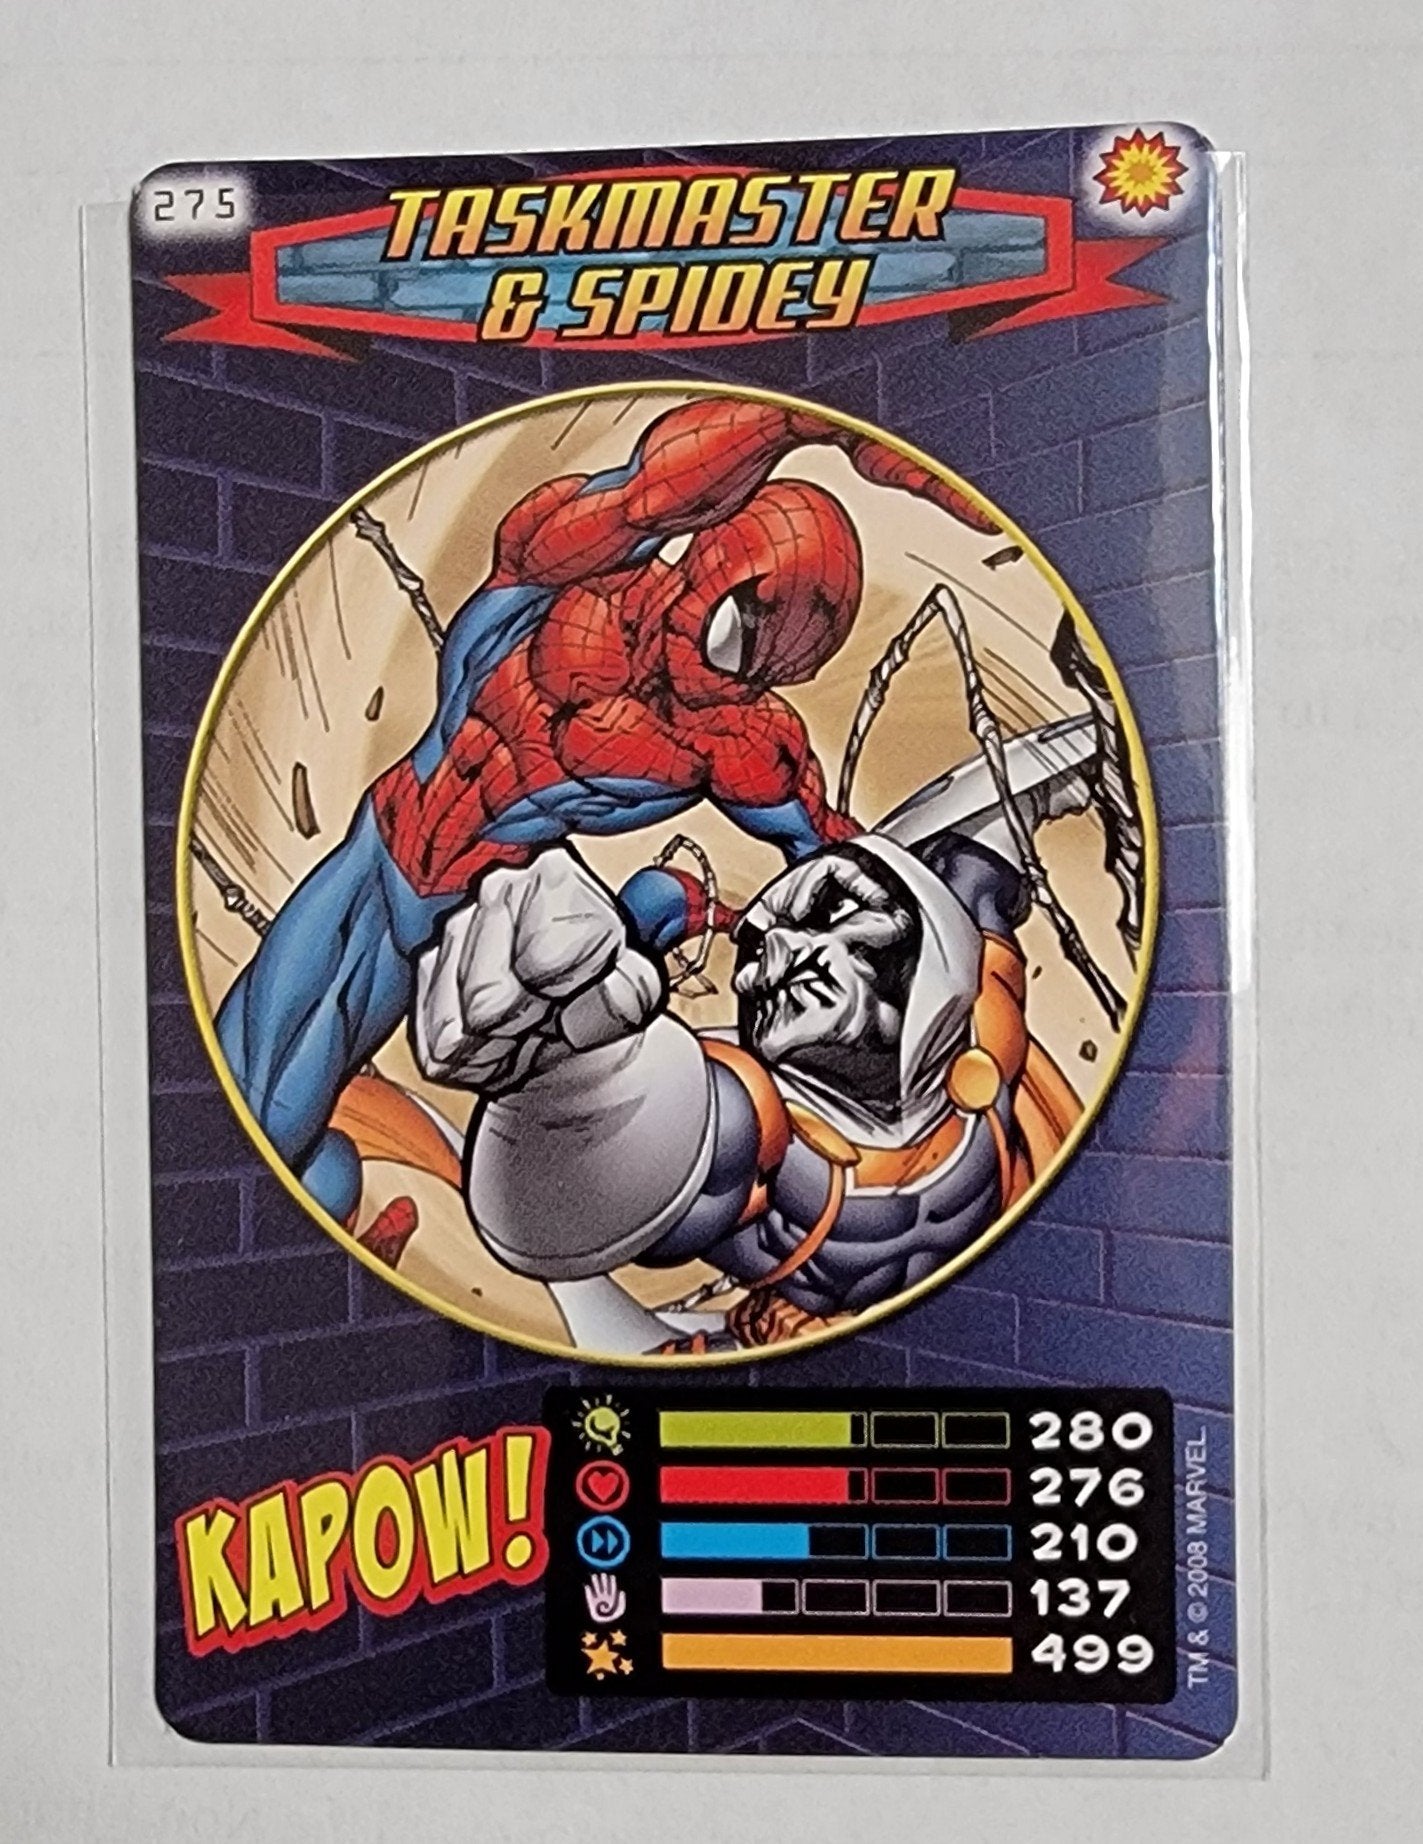 2008 Spiderman Heroes and Villains Taskmaster & Spidey #275 Marvel Booster Trading Card UPTI simple Xclusive Collectibles   